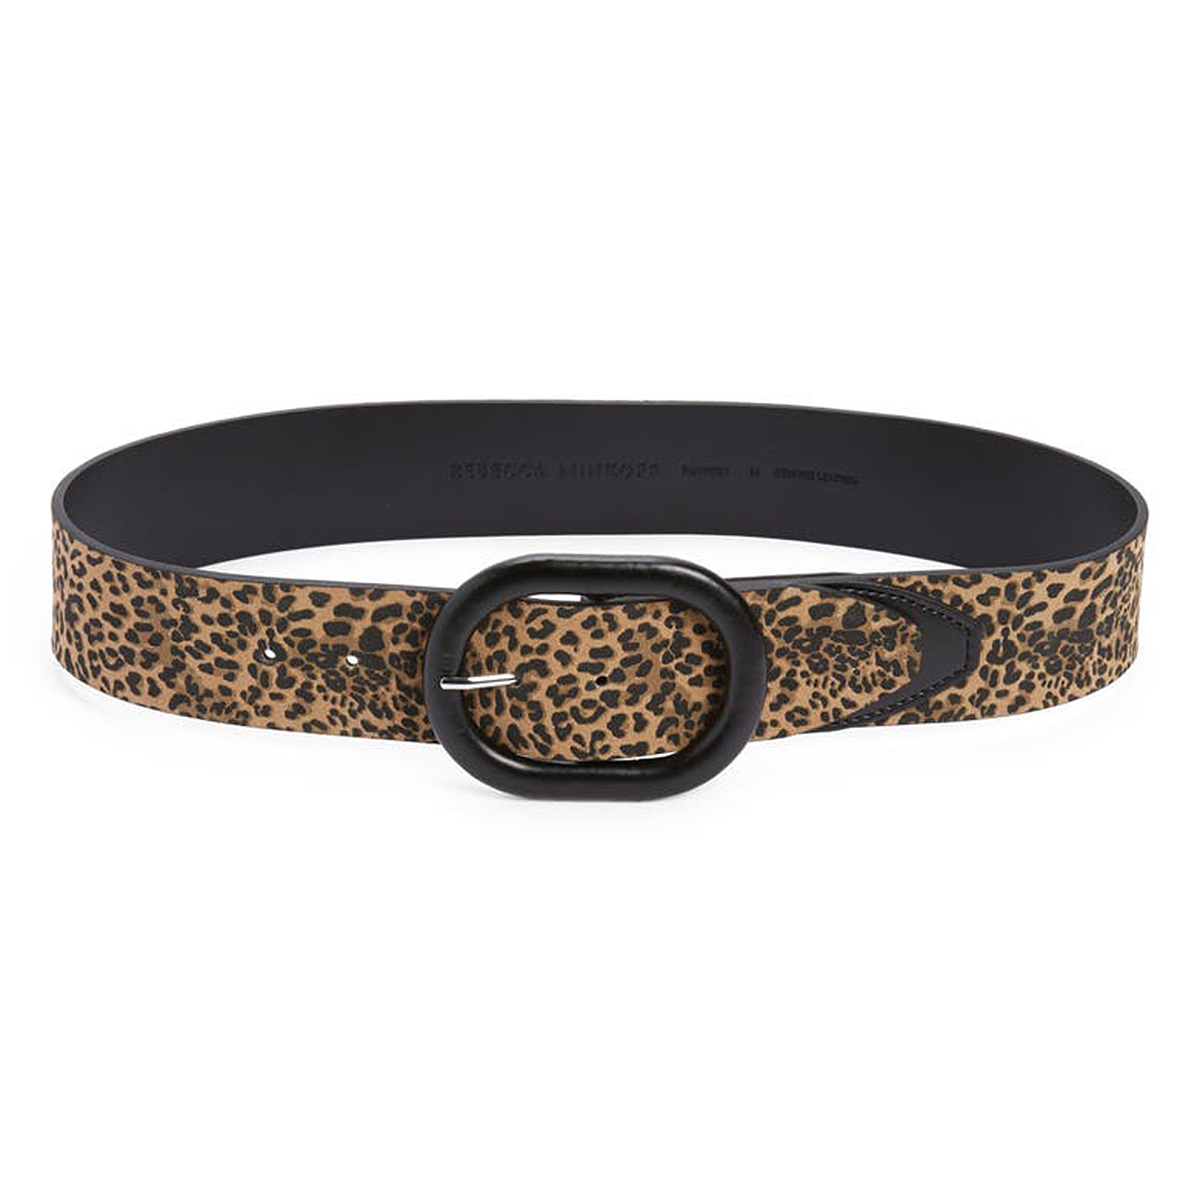 Designer logo belts are a luxe way to complete any outfit. What do